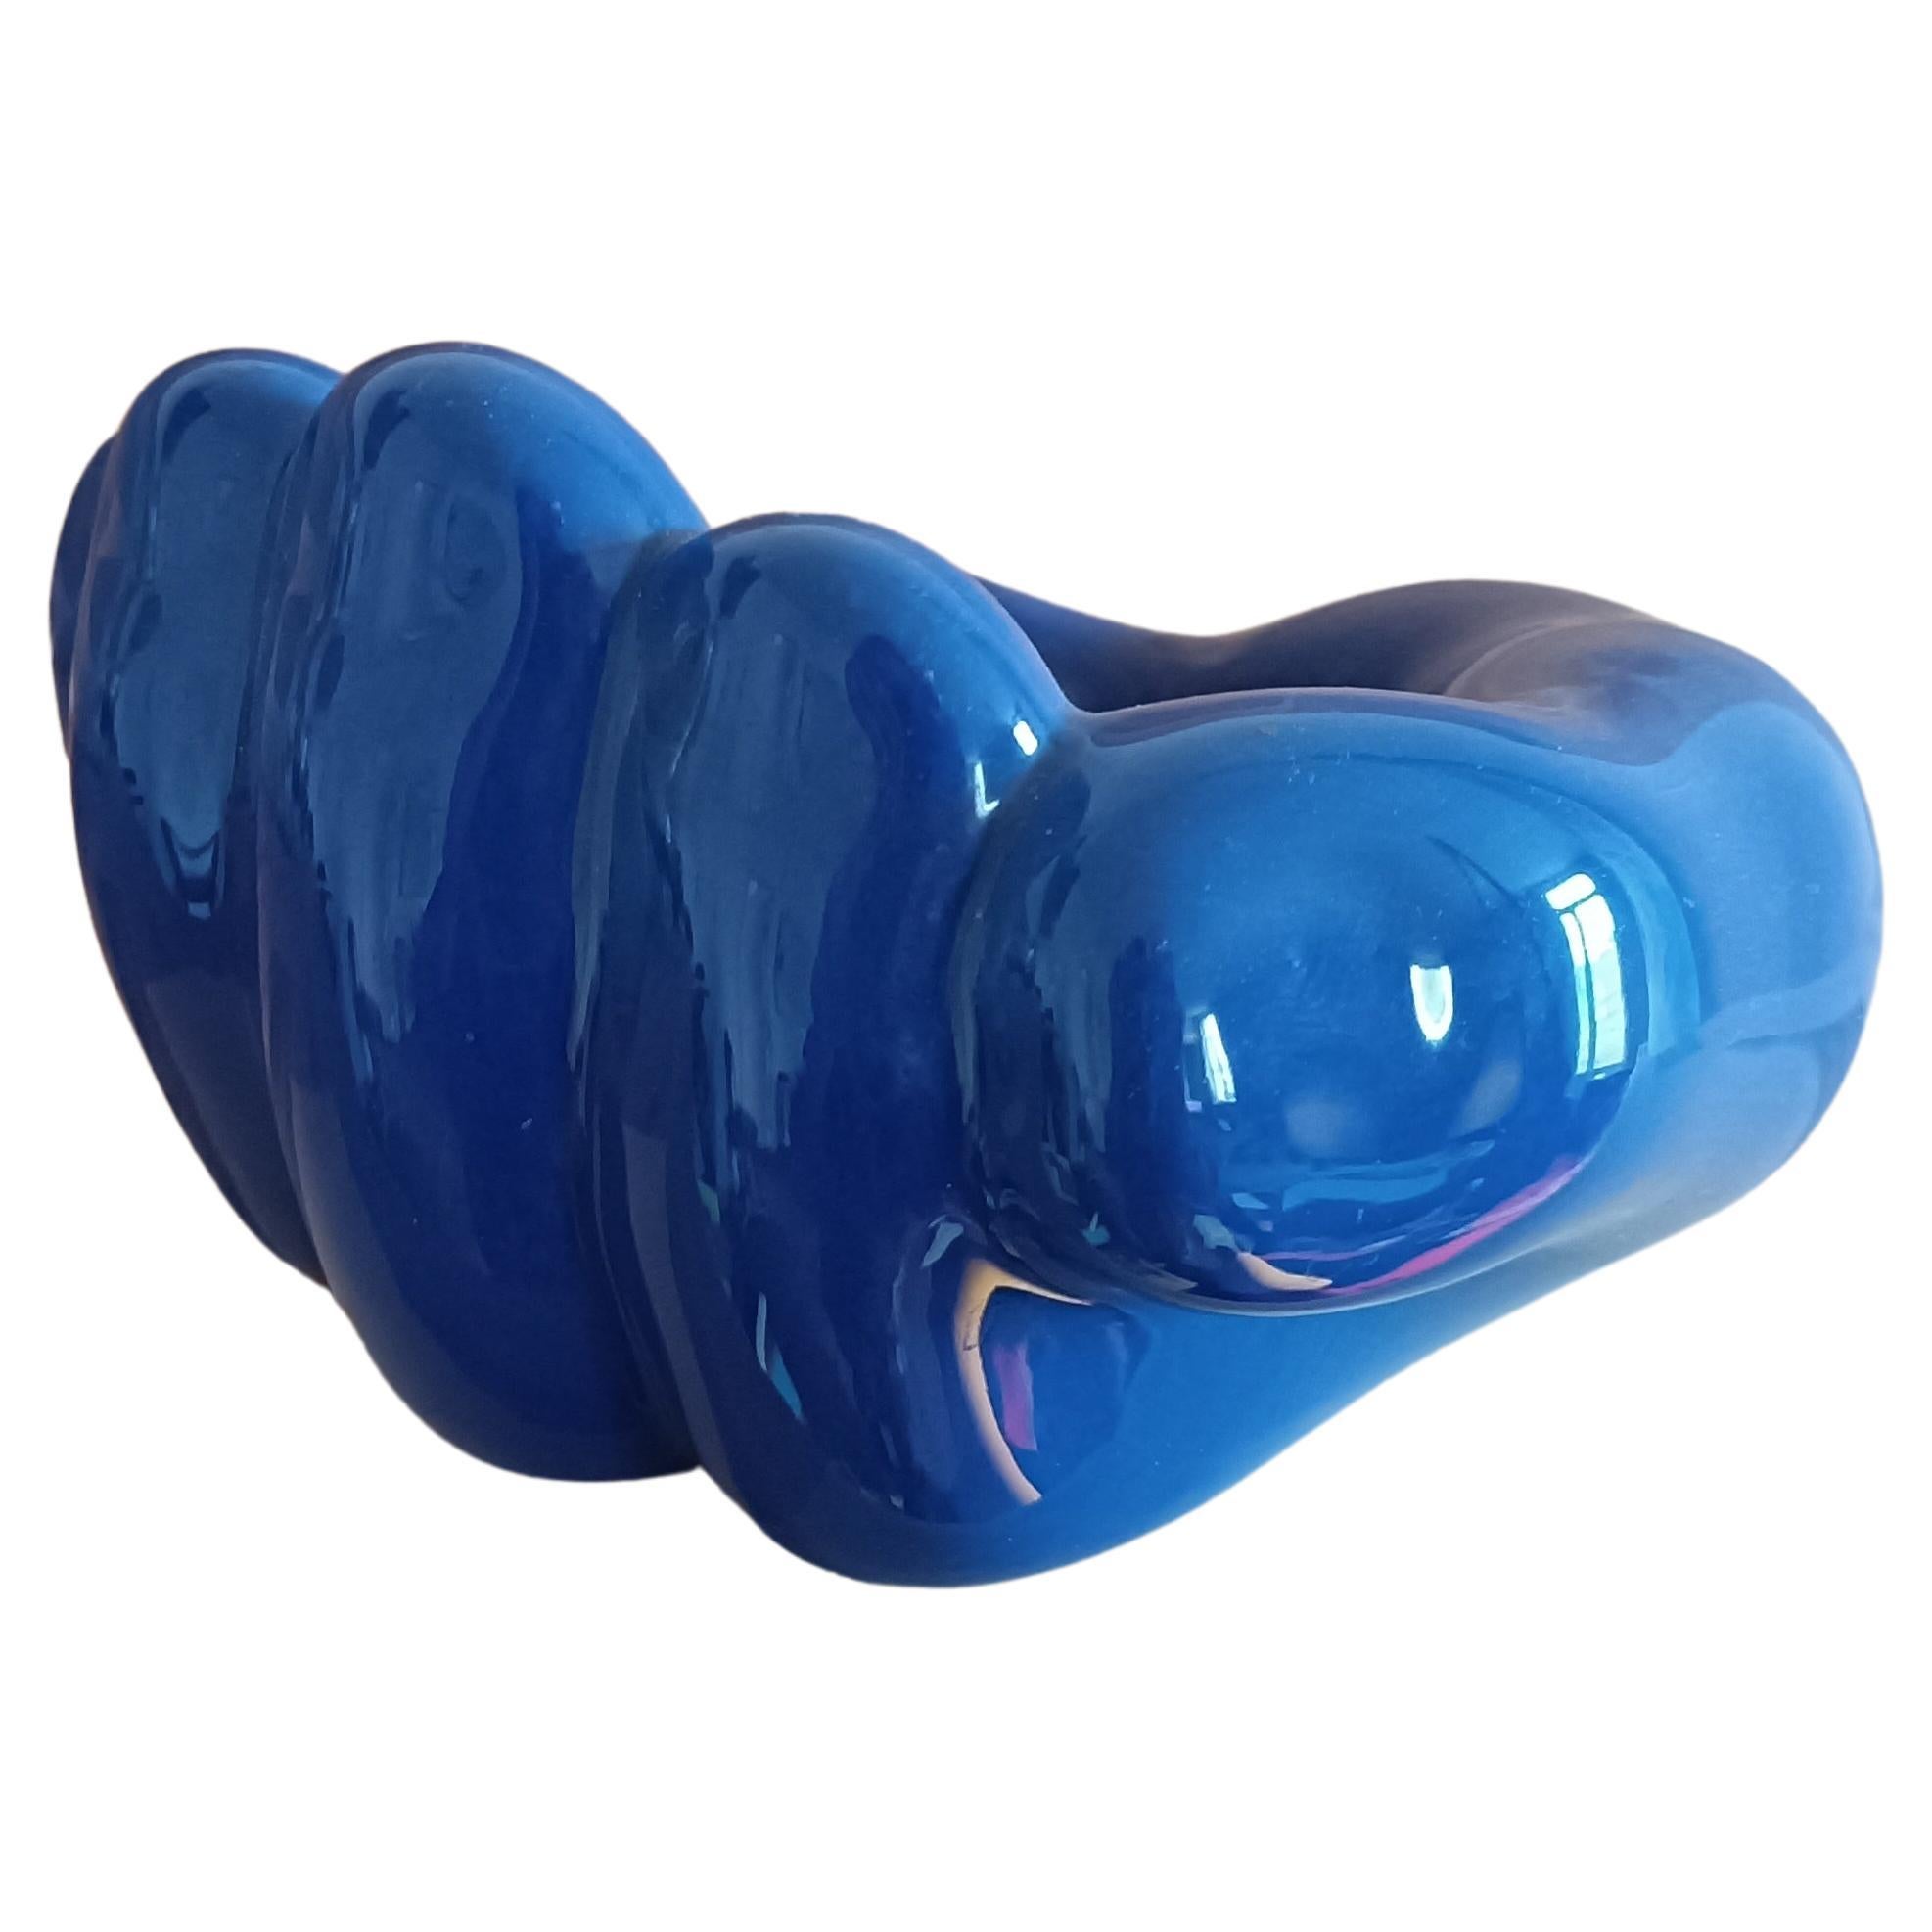 French ceramic Vide Poche circa 1960s - in the style of Georges Jouve, Ruelland

Large hand-shaped pocket organizer. Mid-century plaster enameled with glossy enamel circa 1960s.
In the style of the bear-paw-shaped vide poche by Georges Jouve, this